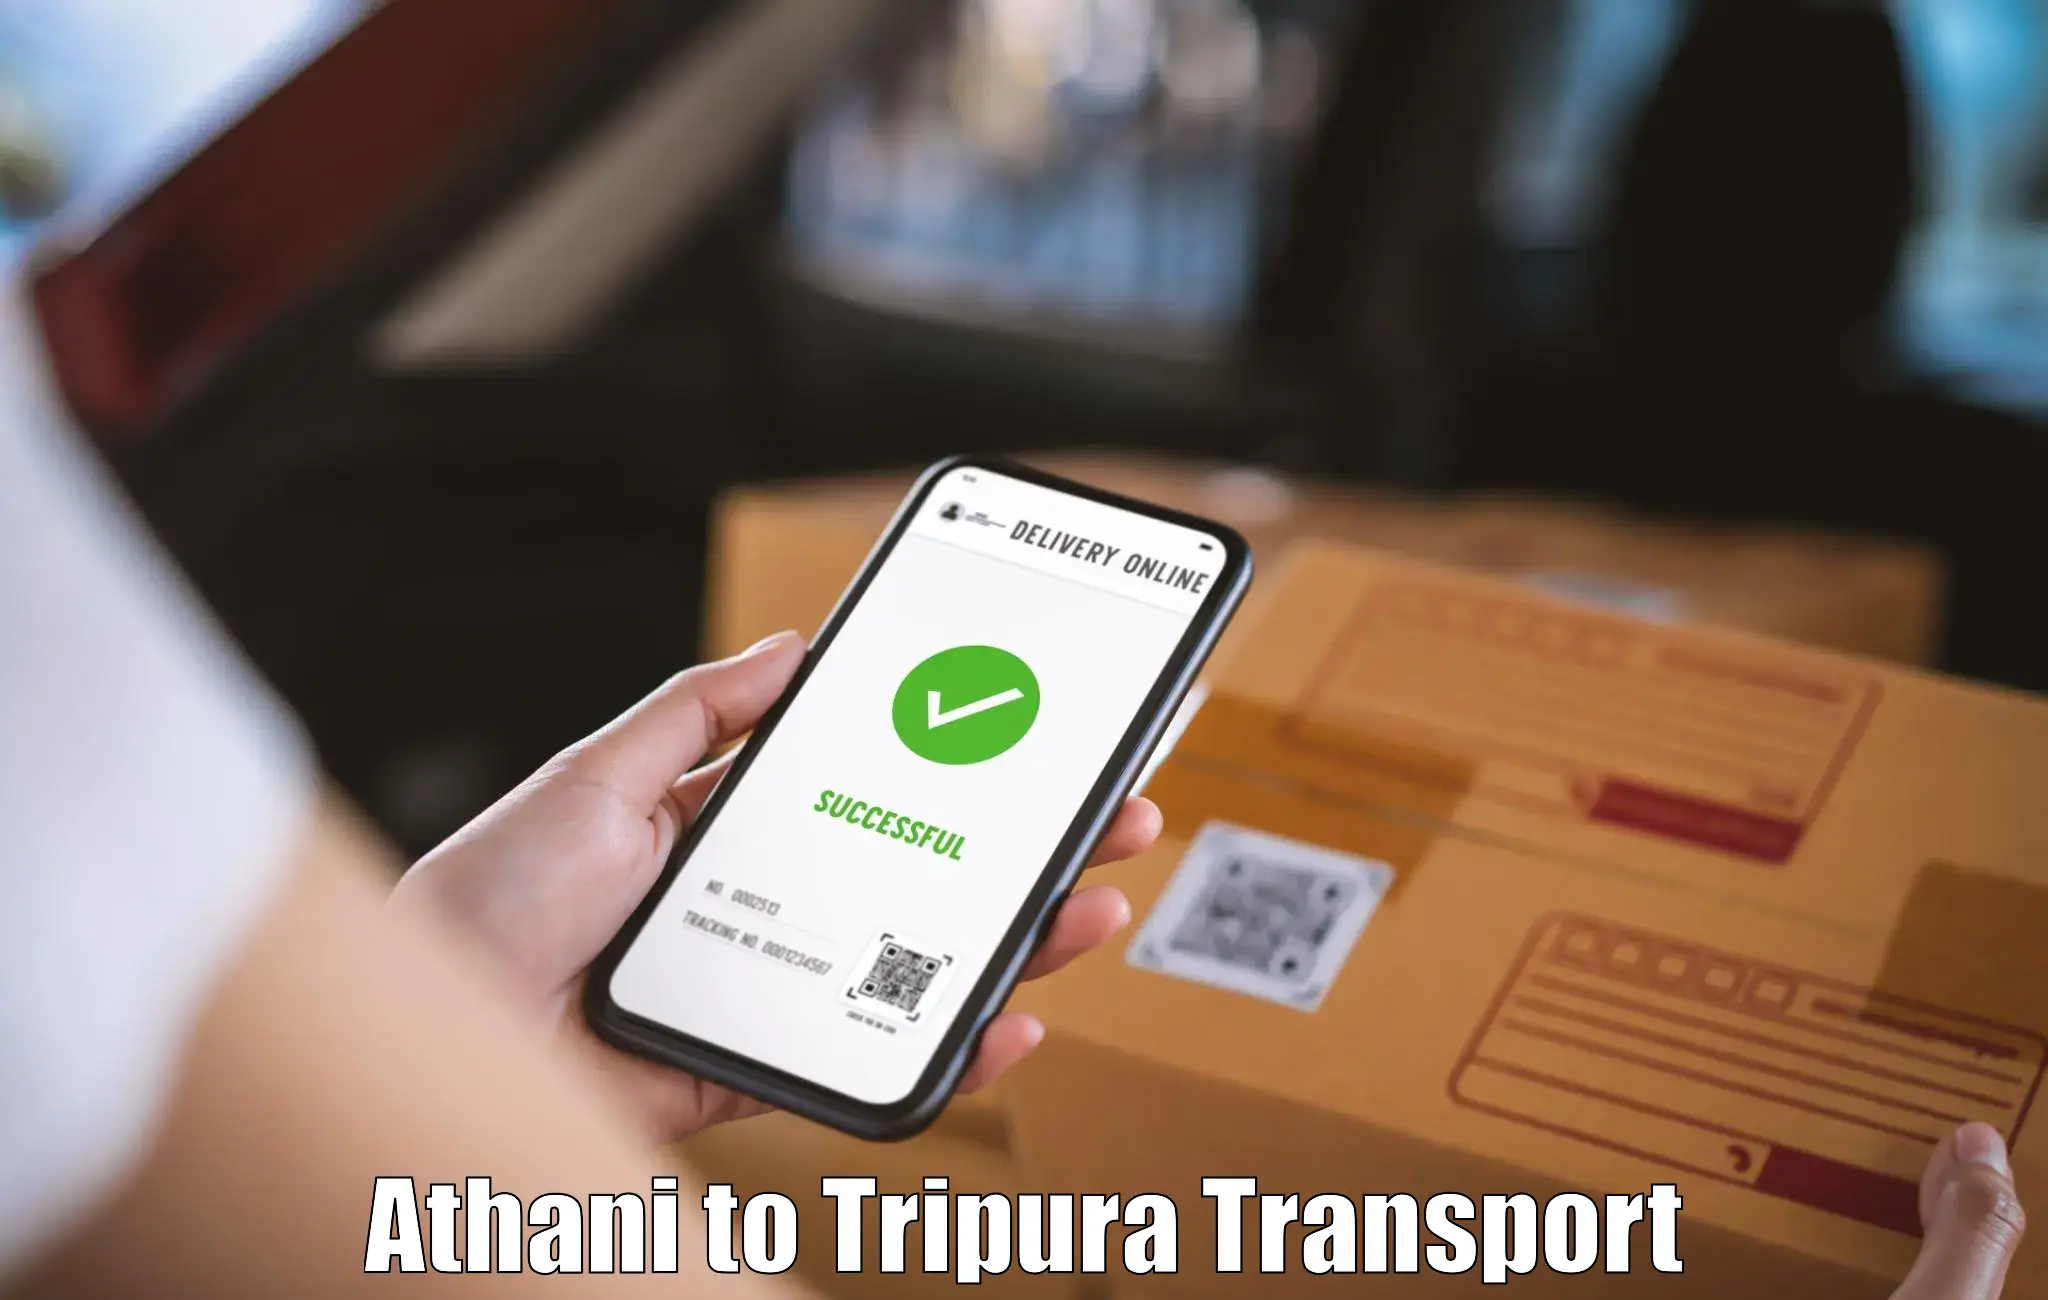 Delivery service Athani to Tripura